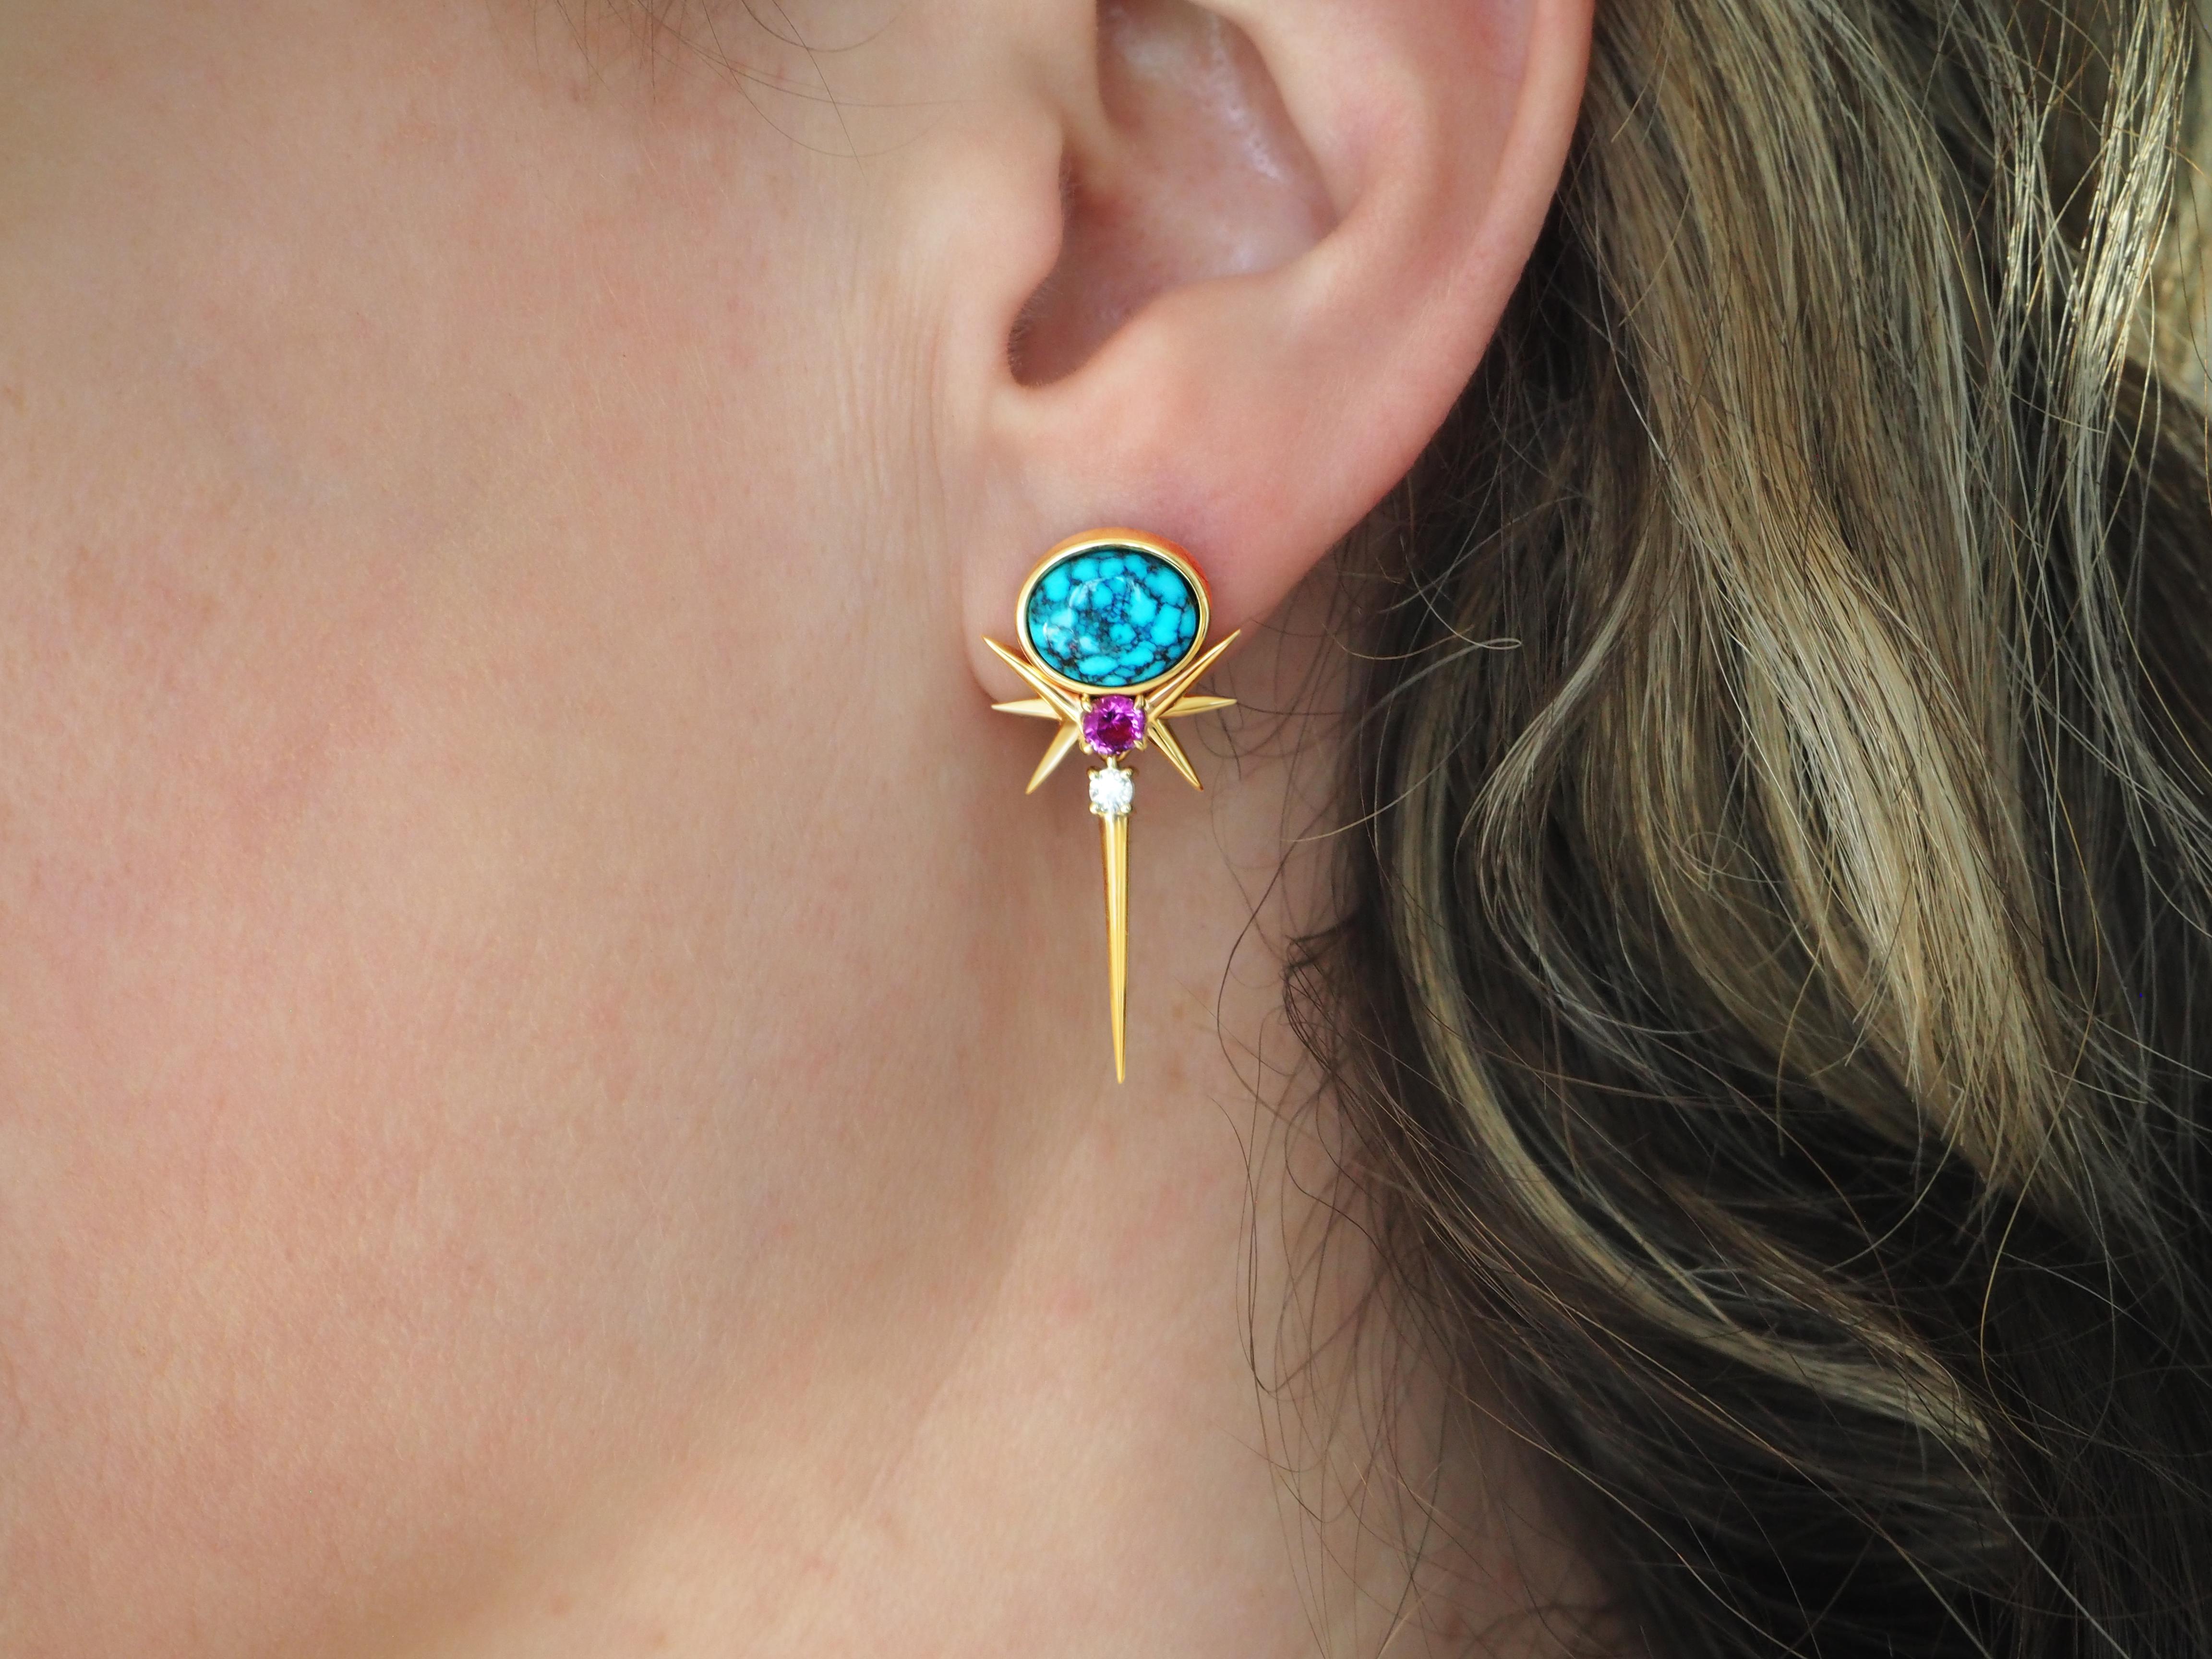 - 14ct Yellow Gold Approx 7.5gms
- Approx 15.3mm Wide x 33mm Length
- Natural Kingman Turquoise Oval-Shaped Cabachon 10mm x 8mm
- 2 x Round Fuchsia Color Sapphires Approx 0.50ct
- 2 x round Brilliant Cut Diamonds F-VS Approx 0.12ct
- Push Back